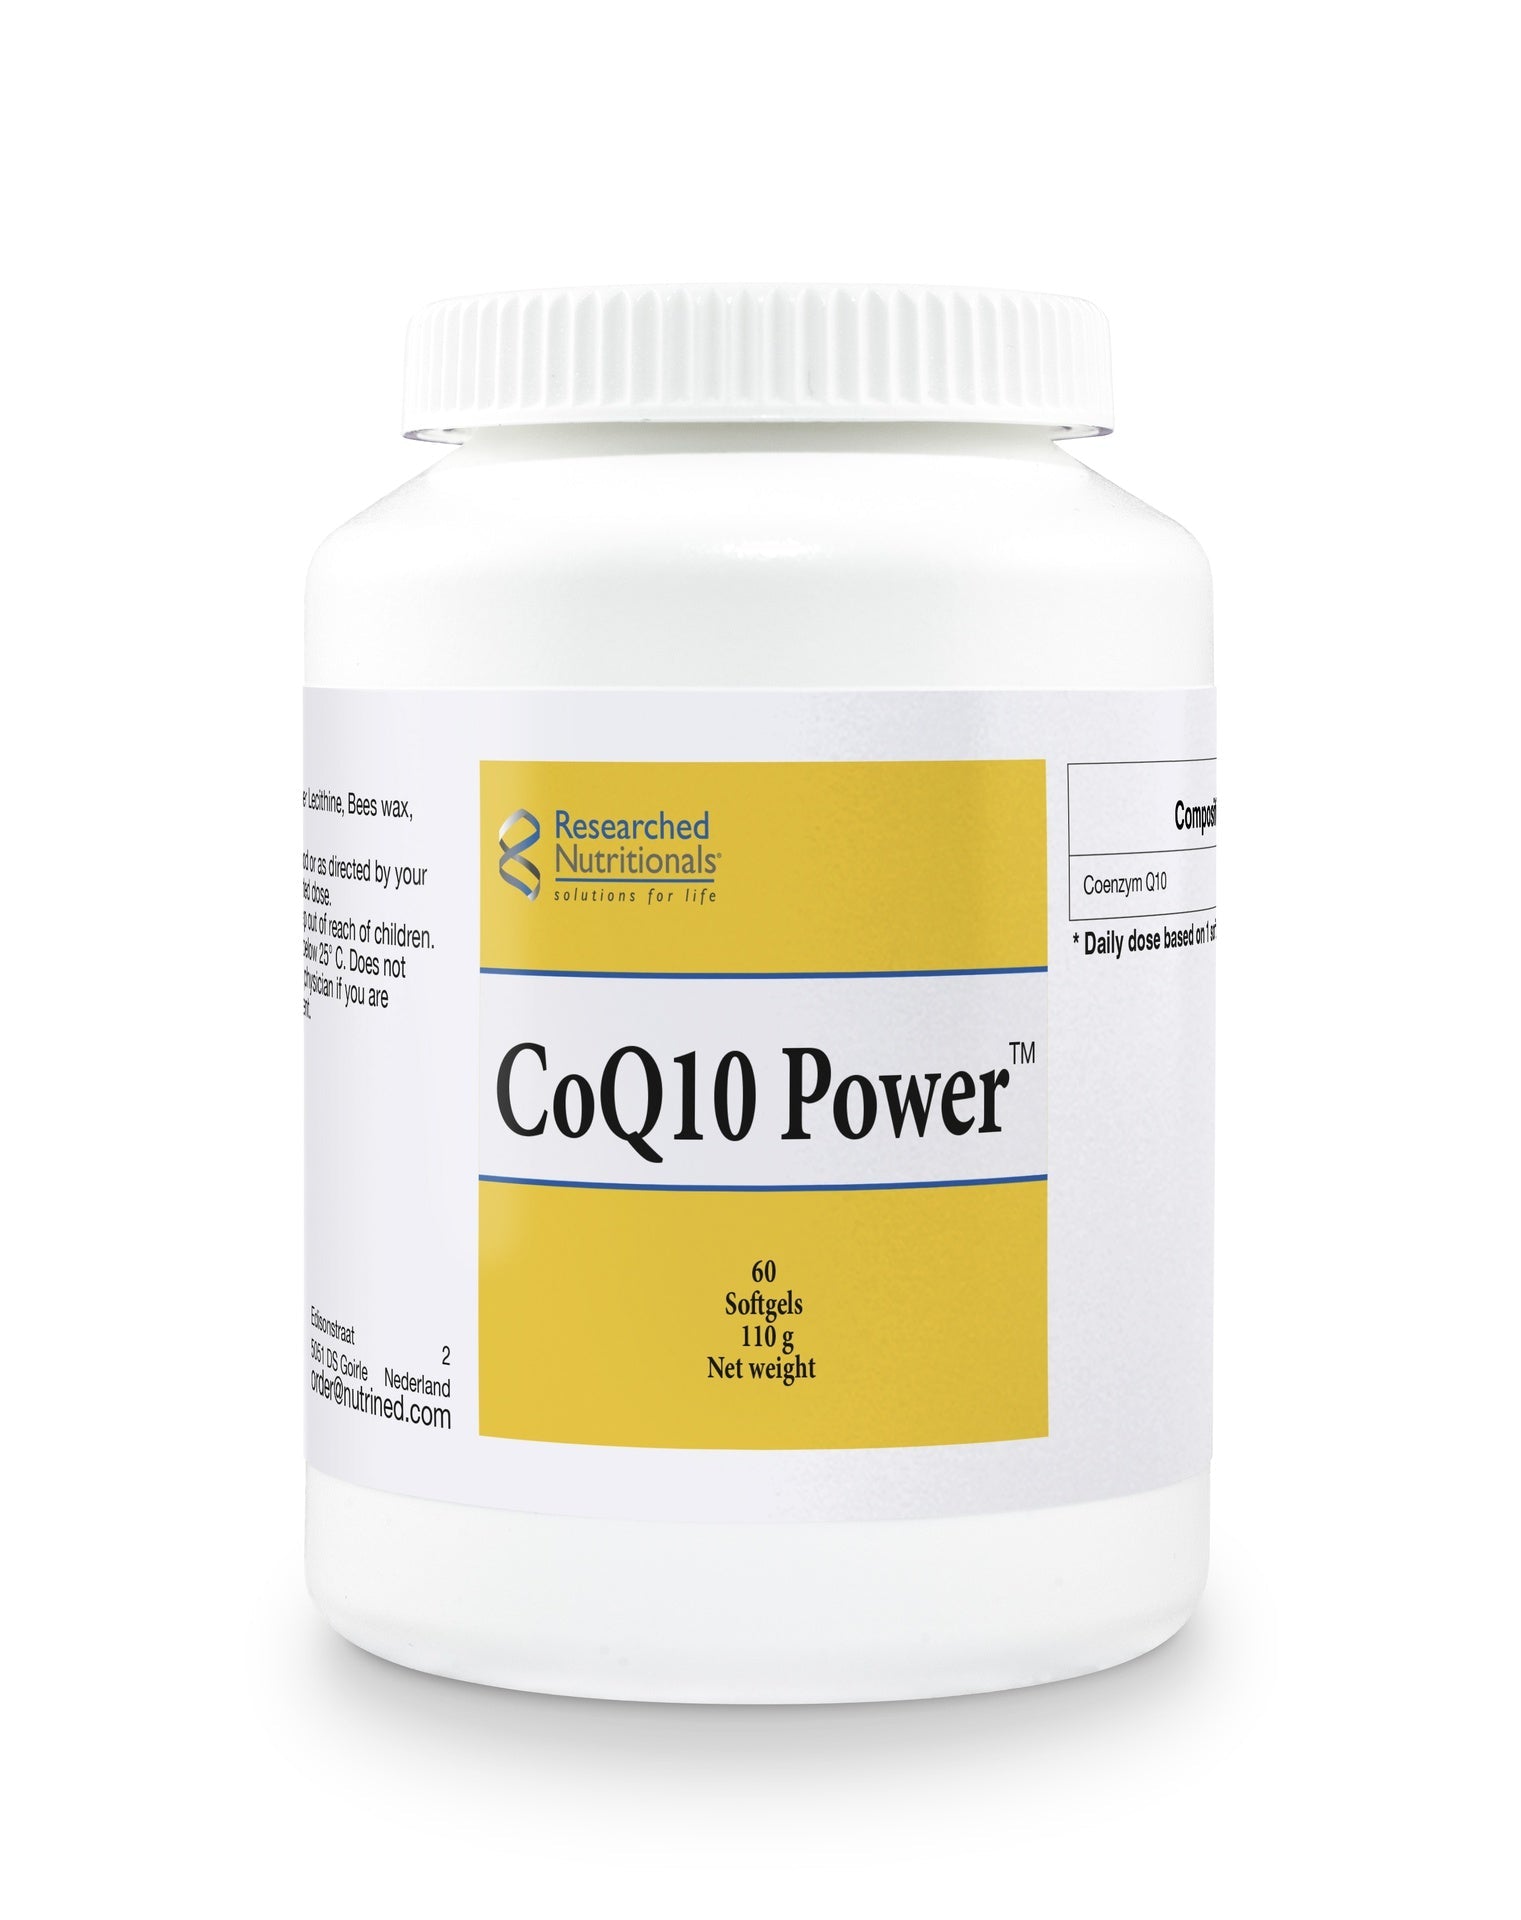 CoQ10 Power 400mg - 60 Softgels | Researched Nutritionals